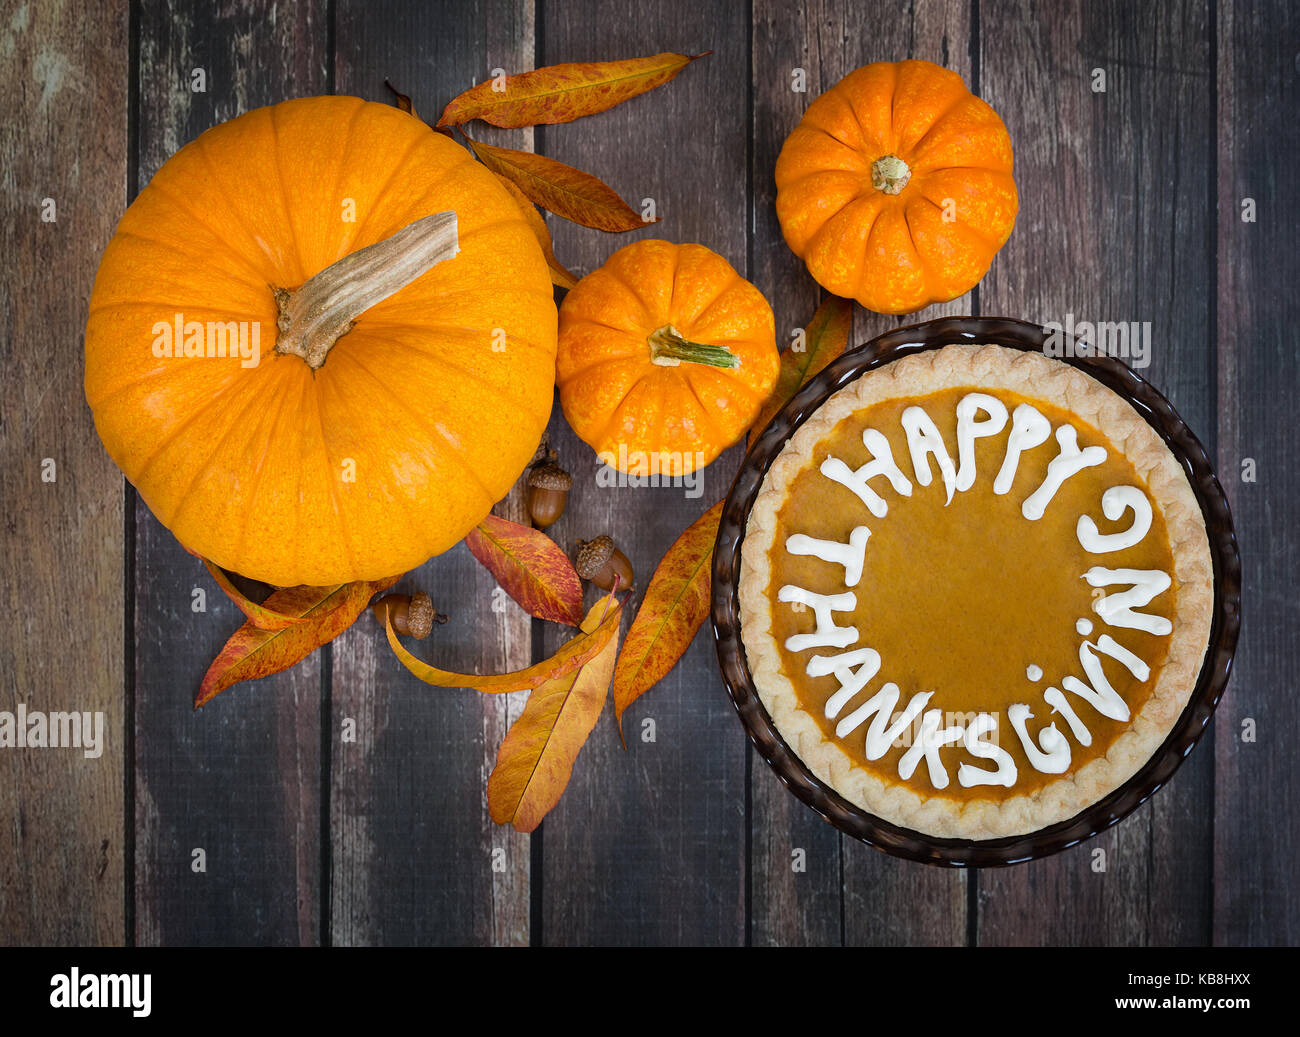 Pumpkin pie with Happy Thanksgiving text. Displayed with pumpkins, golden autumn leaves, and acorns on rustic table. Top view. Stock Photo